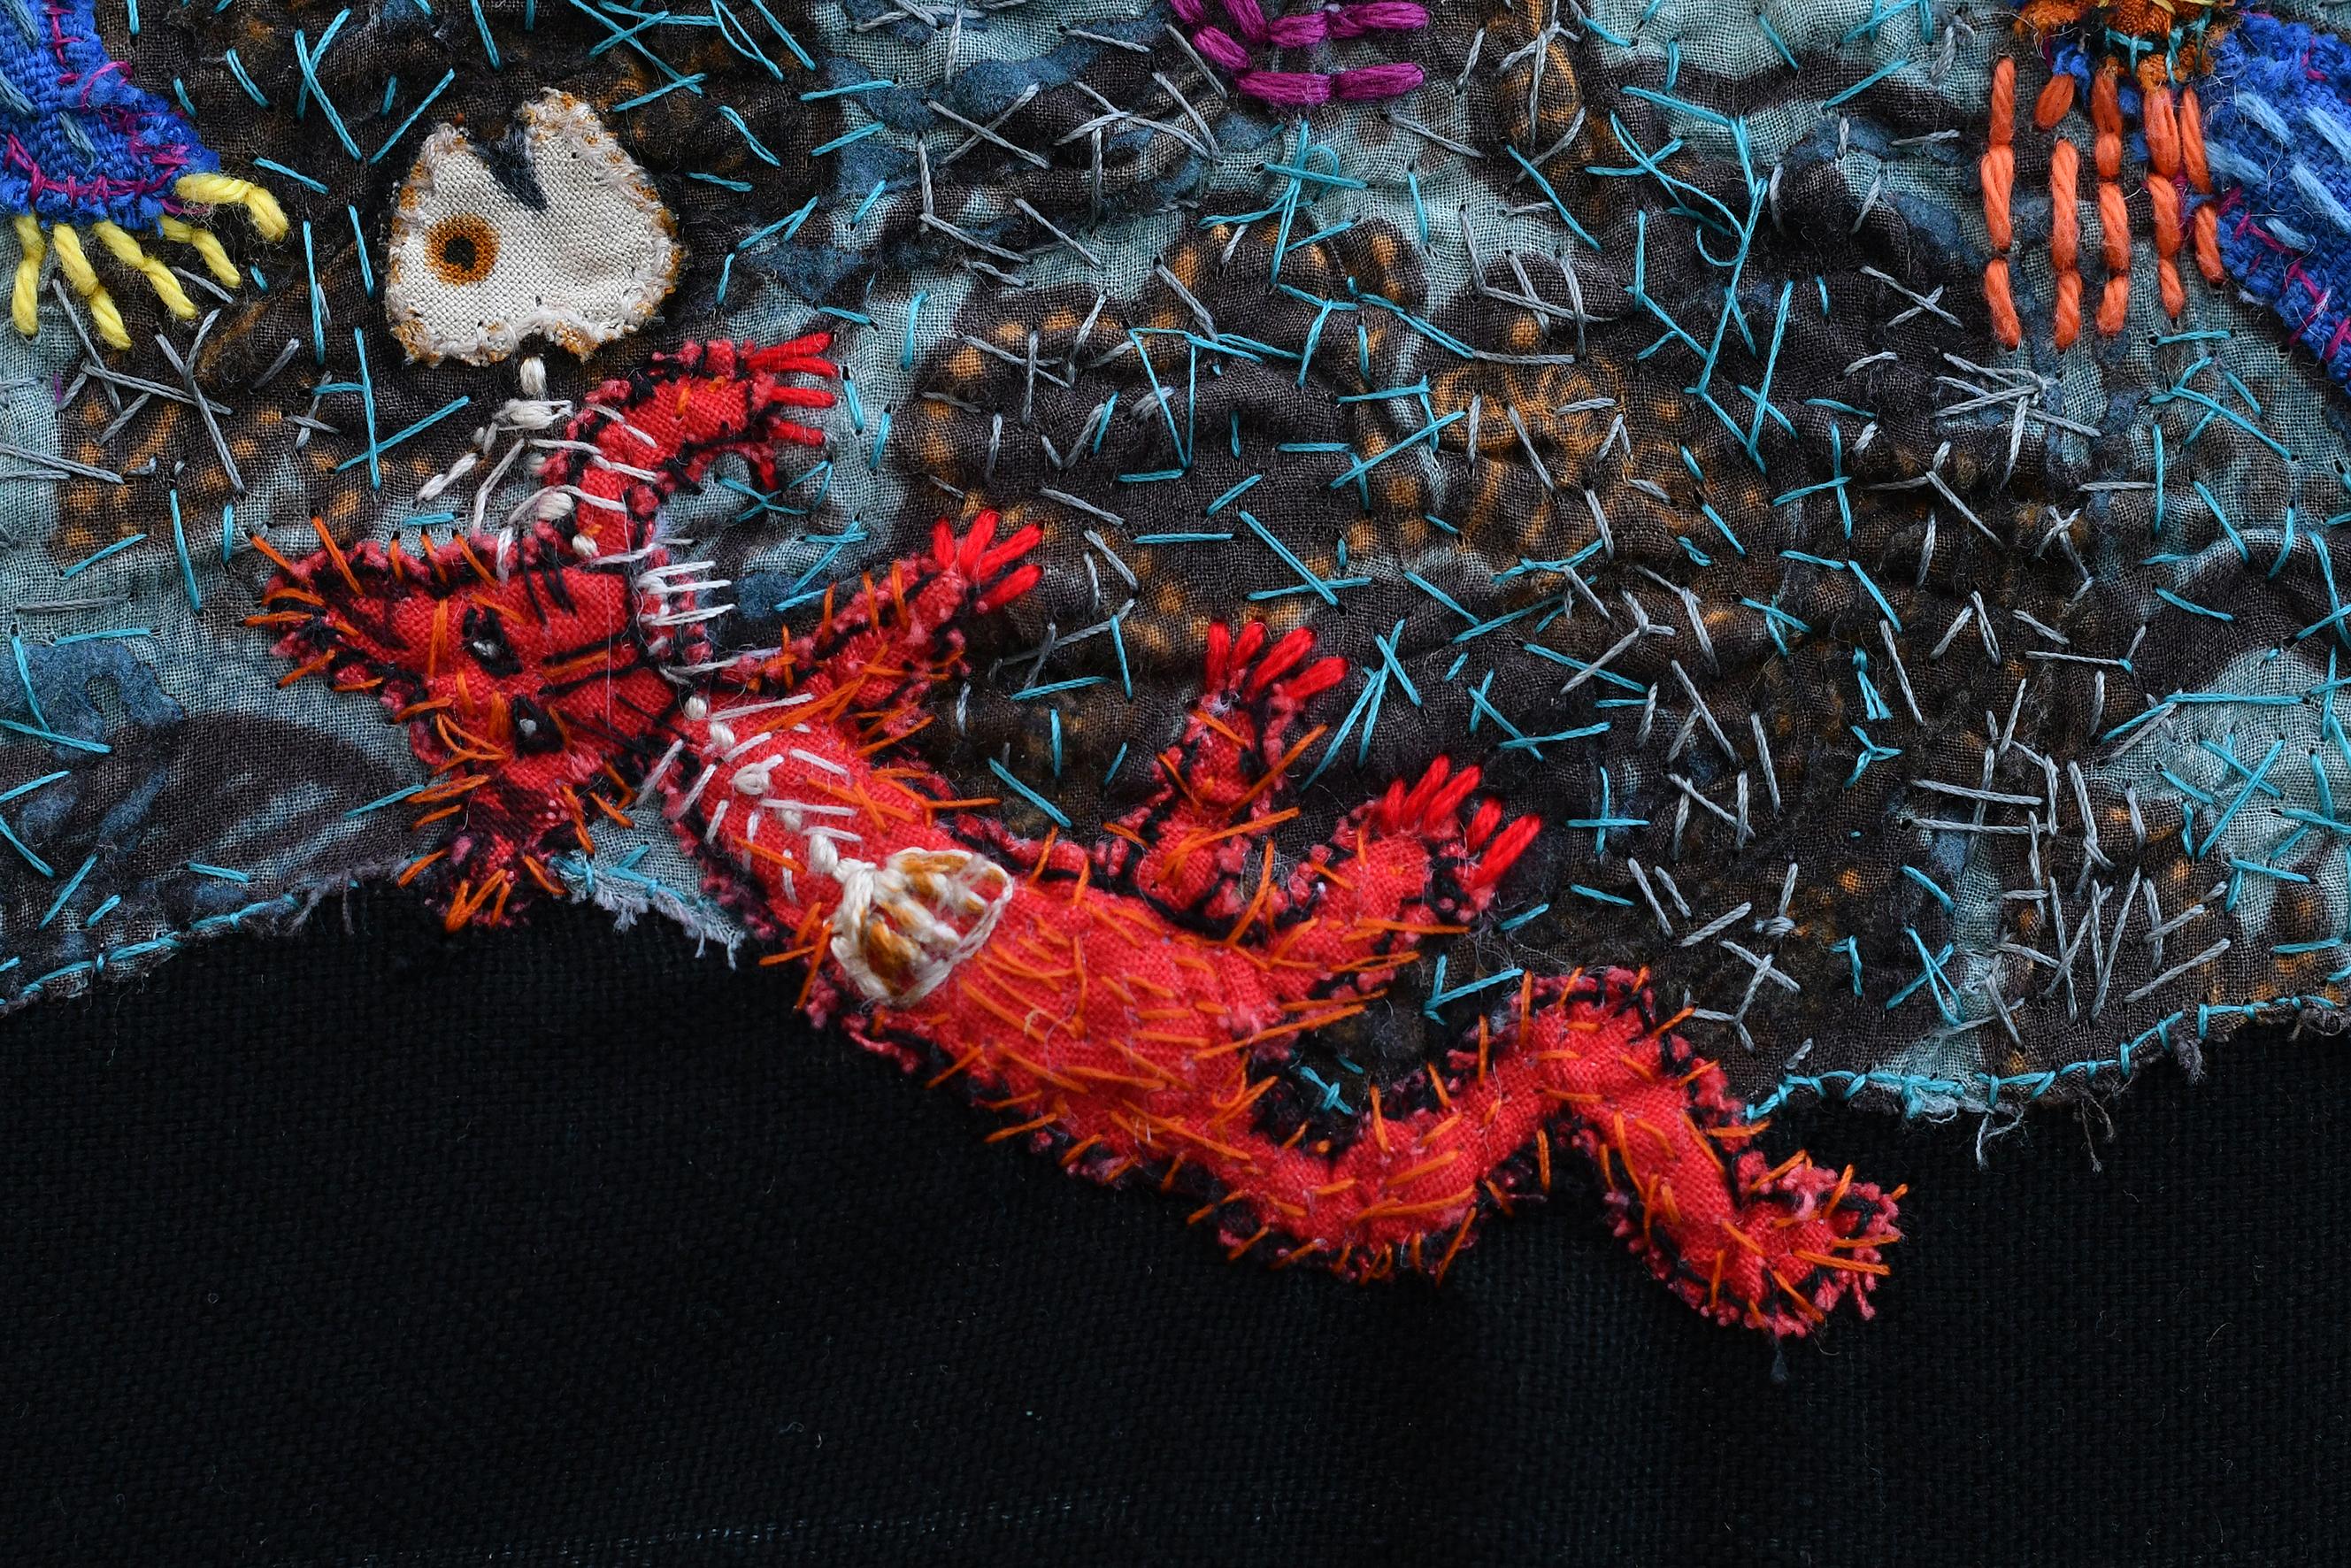 Embroidered textile painting
Unique work, hand-signed by the artist

Penelope or Parque of modern times, Barbara d’Antuono sews by hand like others recite mantras and decides nothing in advance. She lets images arise without any particular coherence